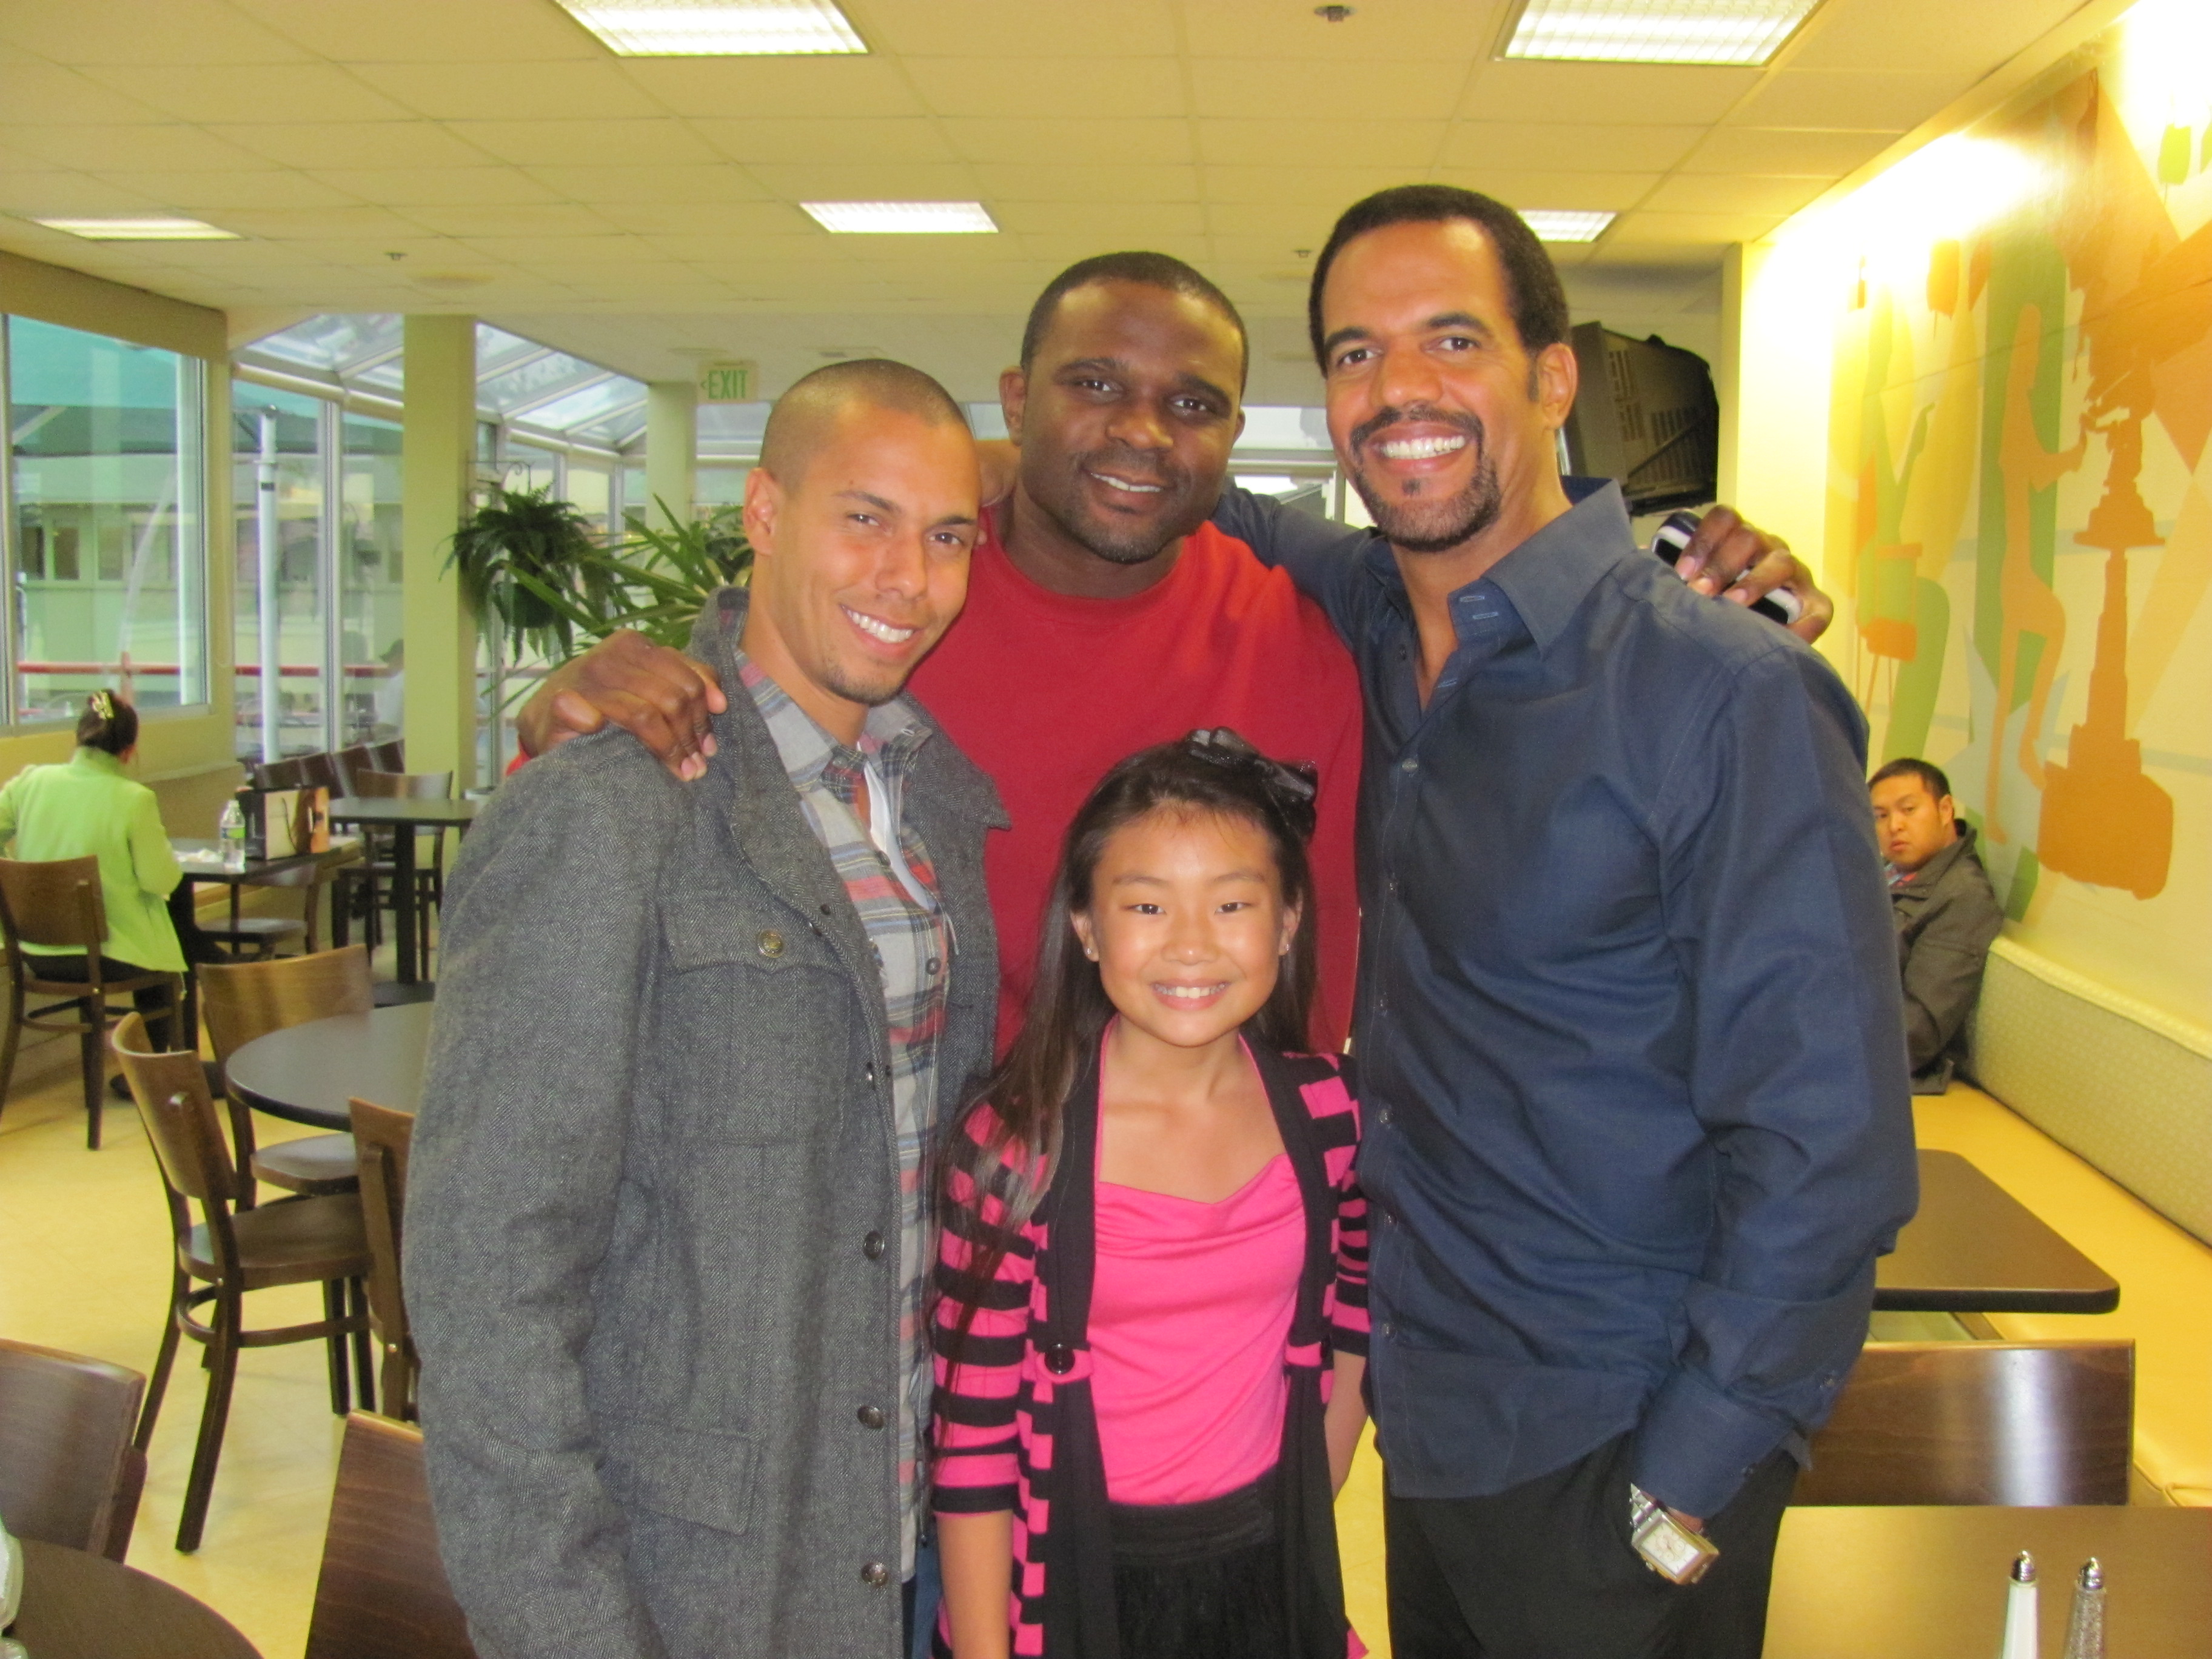 Victoria Grace on set of The Young and the Restless with Bryton James, Darius McCrary, and Kristoff St. John.